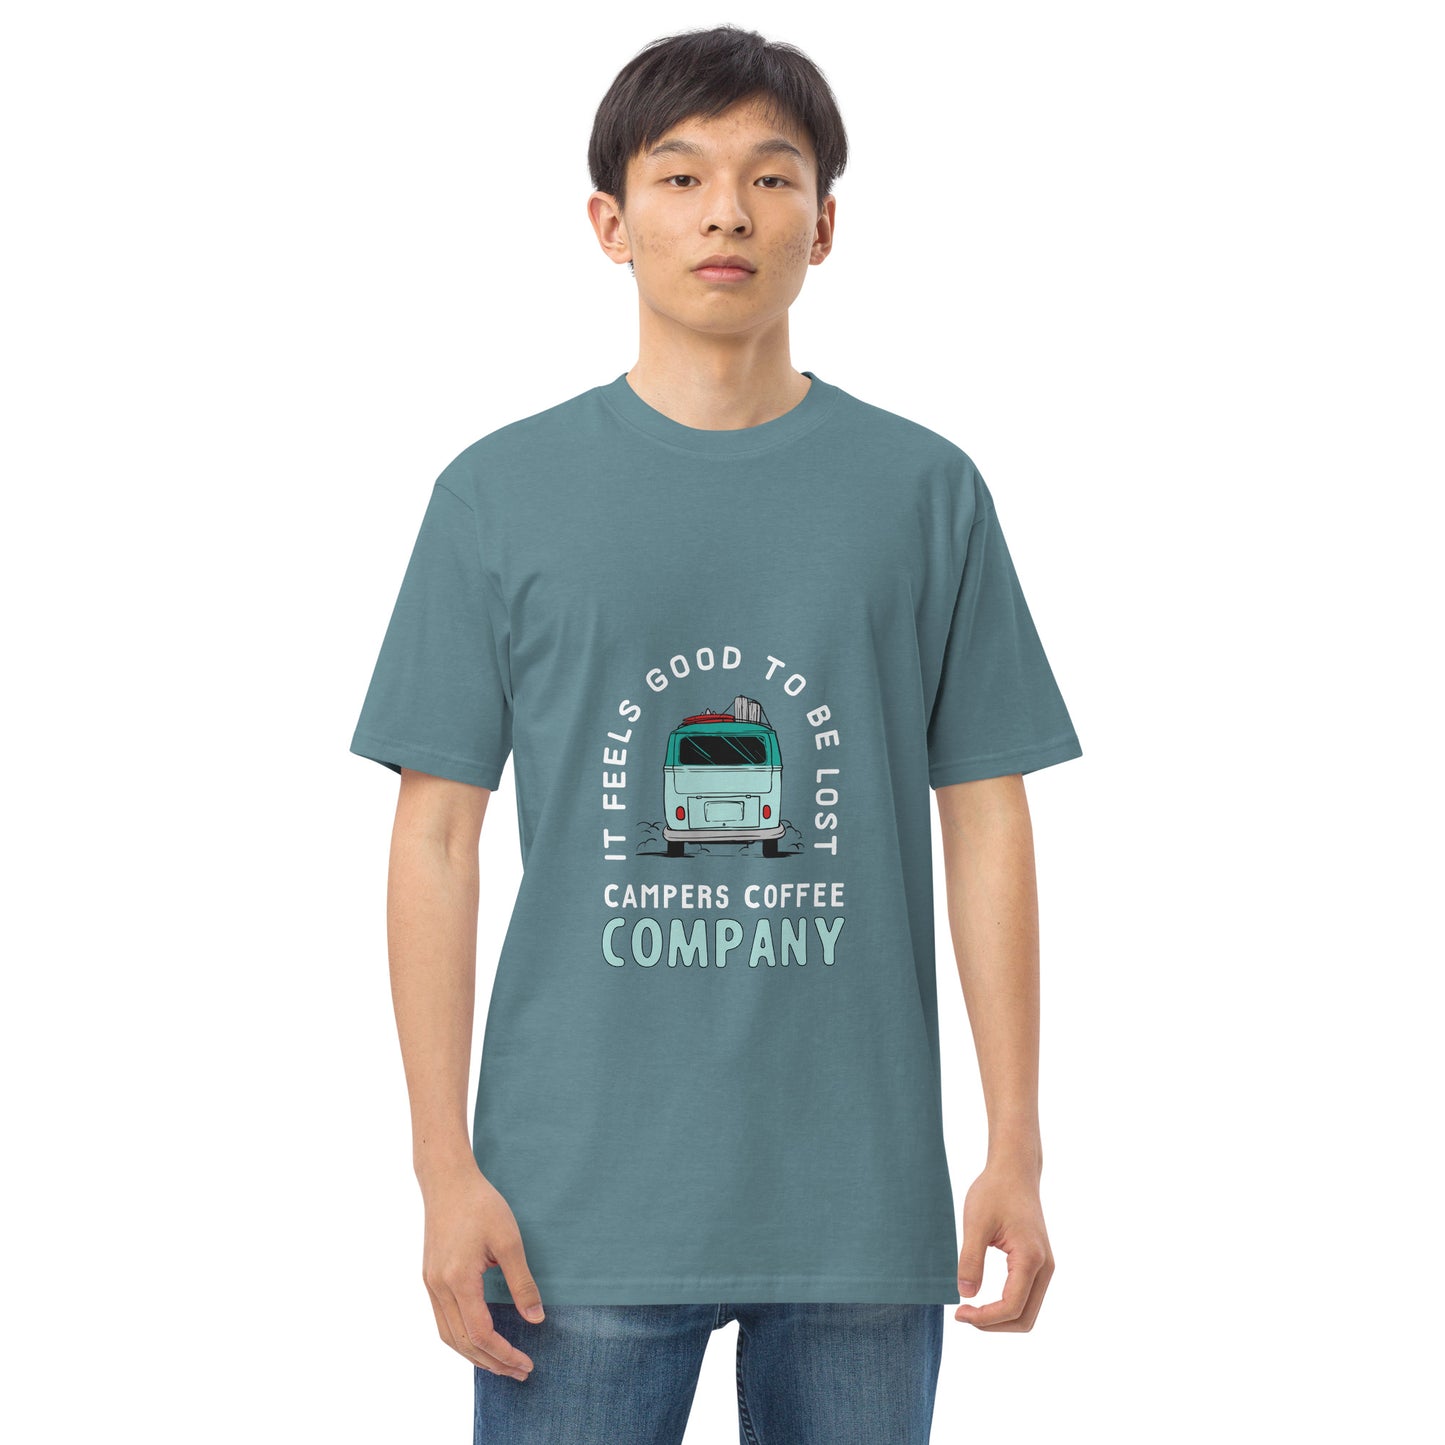 Campers Coffee Get lost shirt